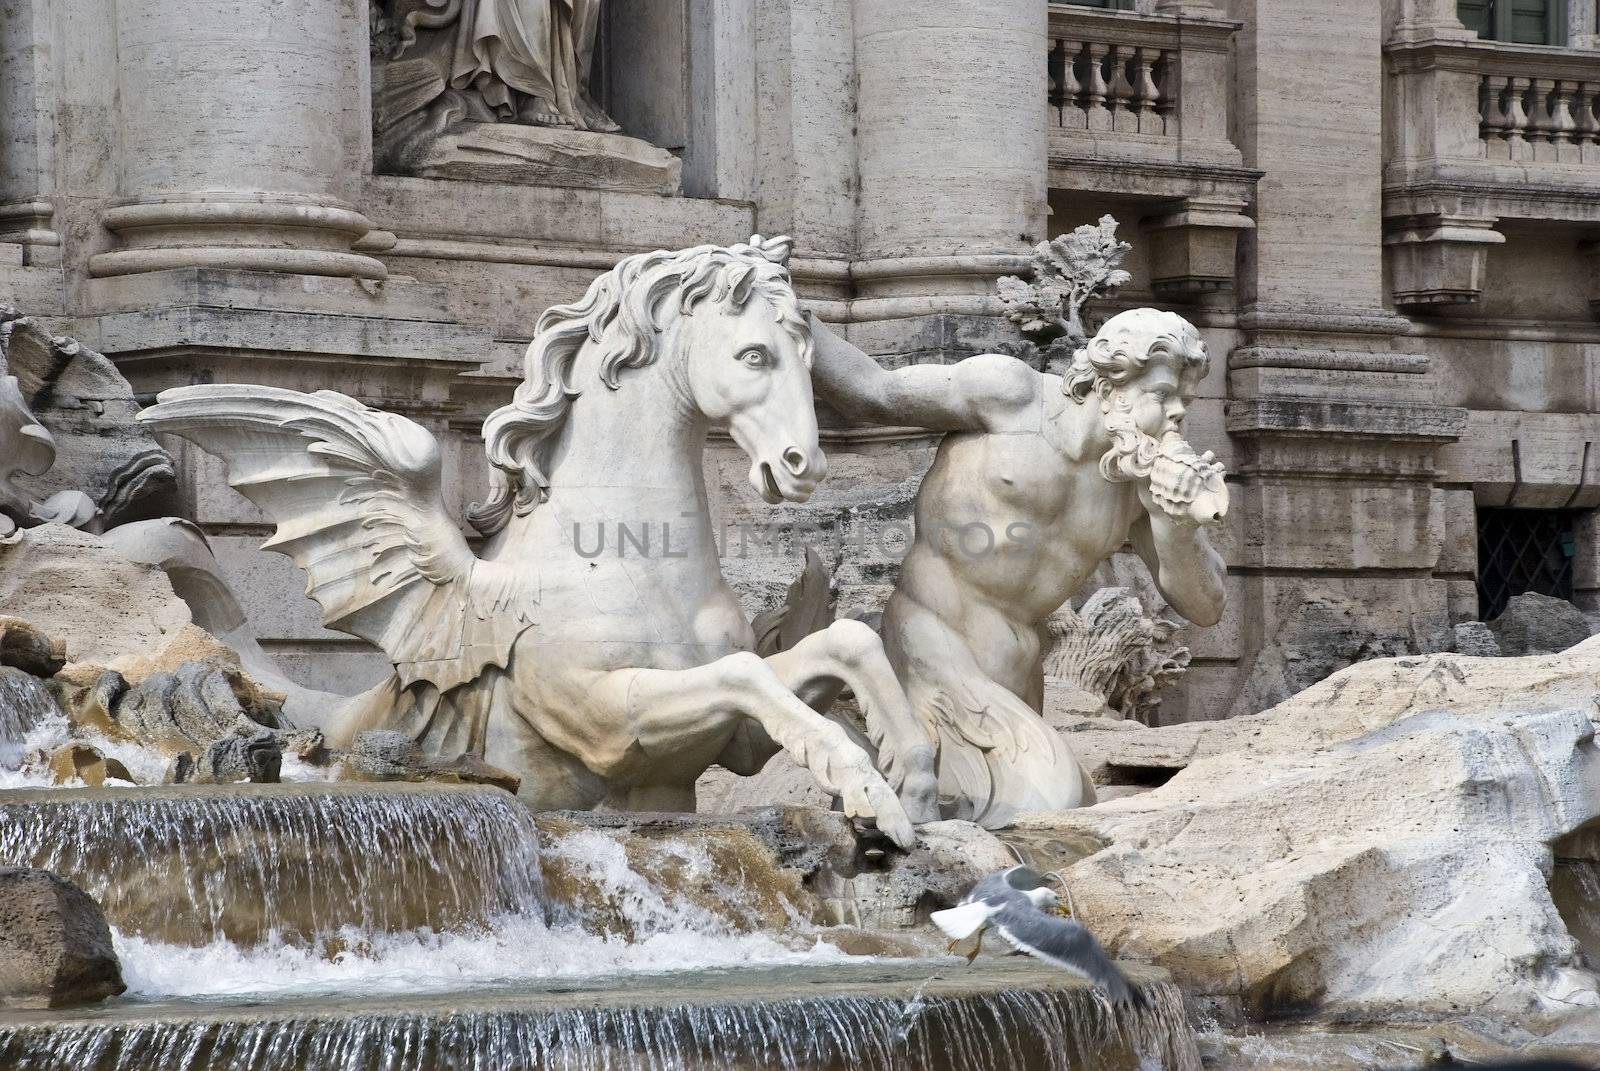 The Trevi Fountain (Italian: Fontana di Trevi) is a fountain in Rome, Italy. it is largest Baroque fountain in the city. It is located in the rione of Trevi. 